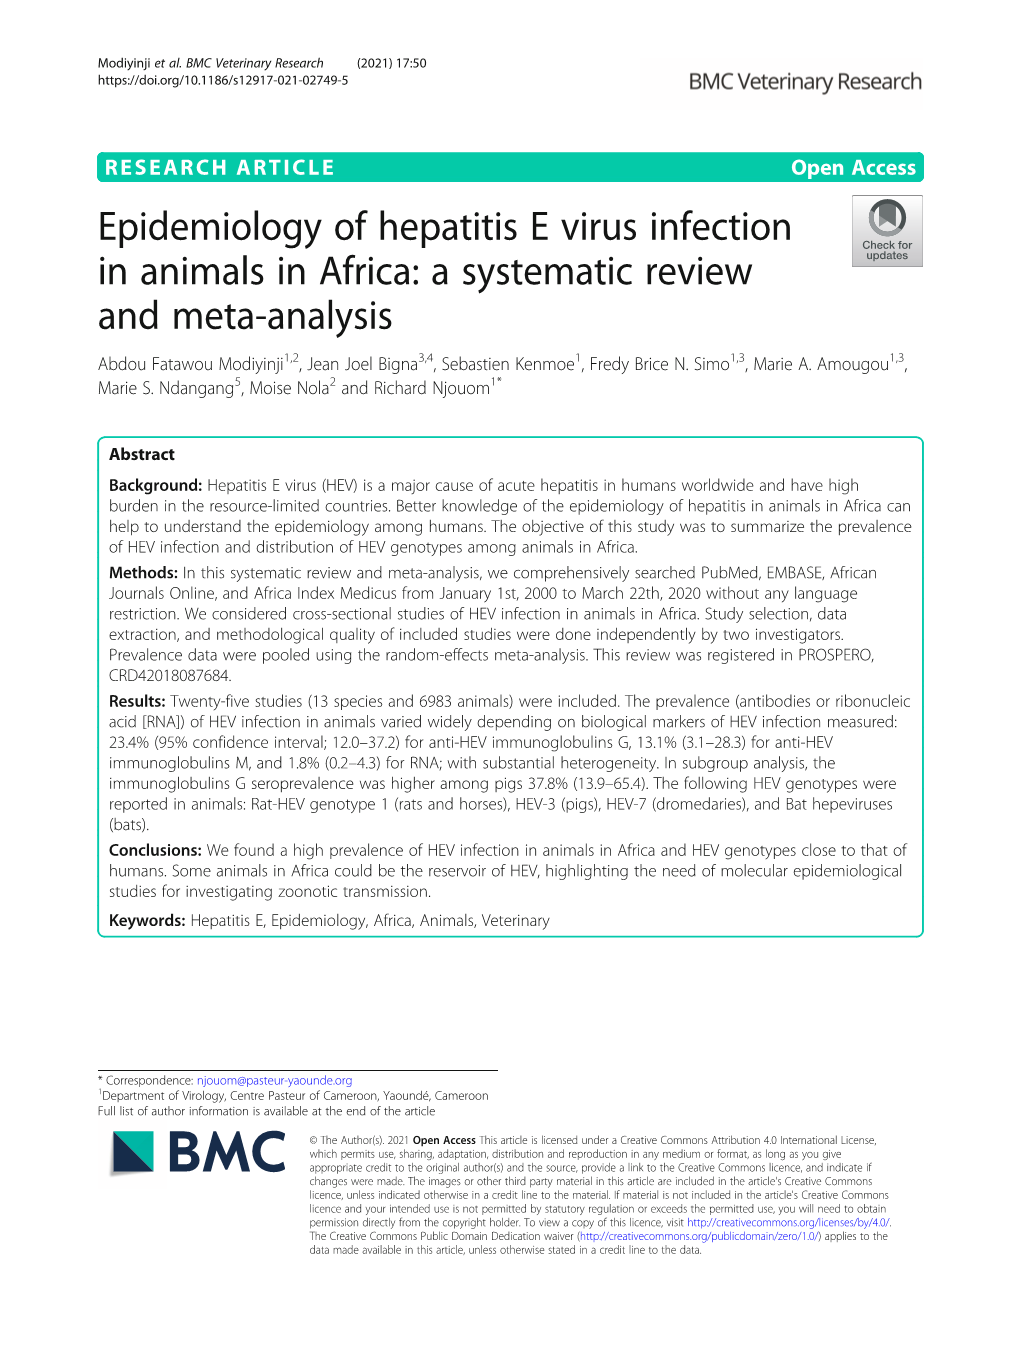 Epidemiology of Hepatitis E Virus Infection in Animals in Africa: A